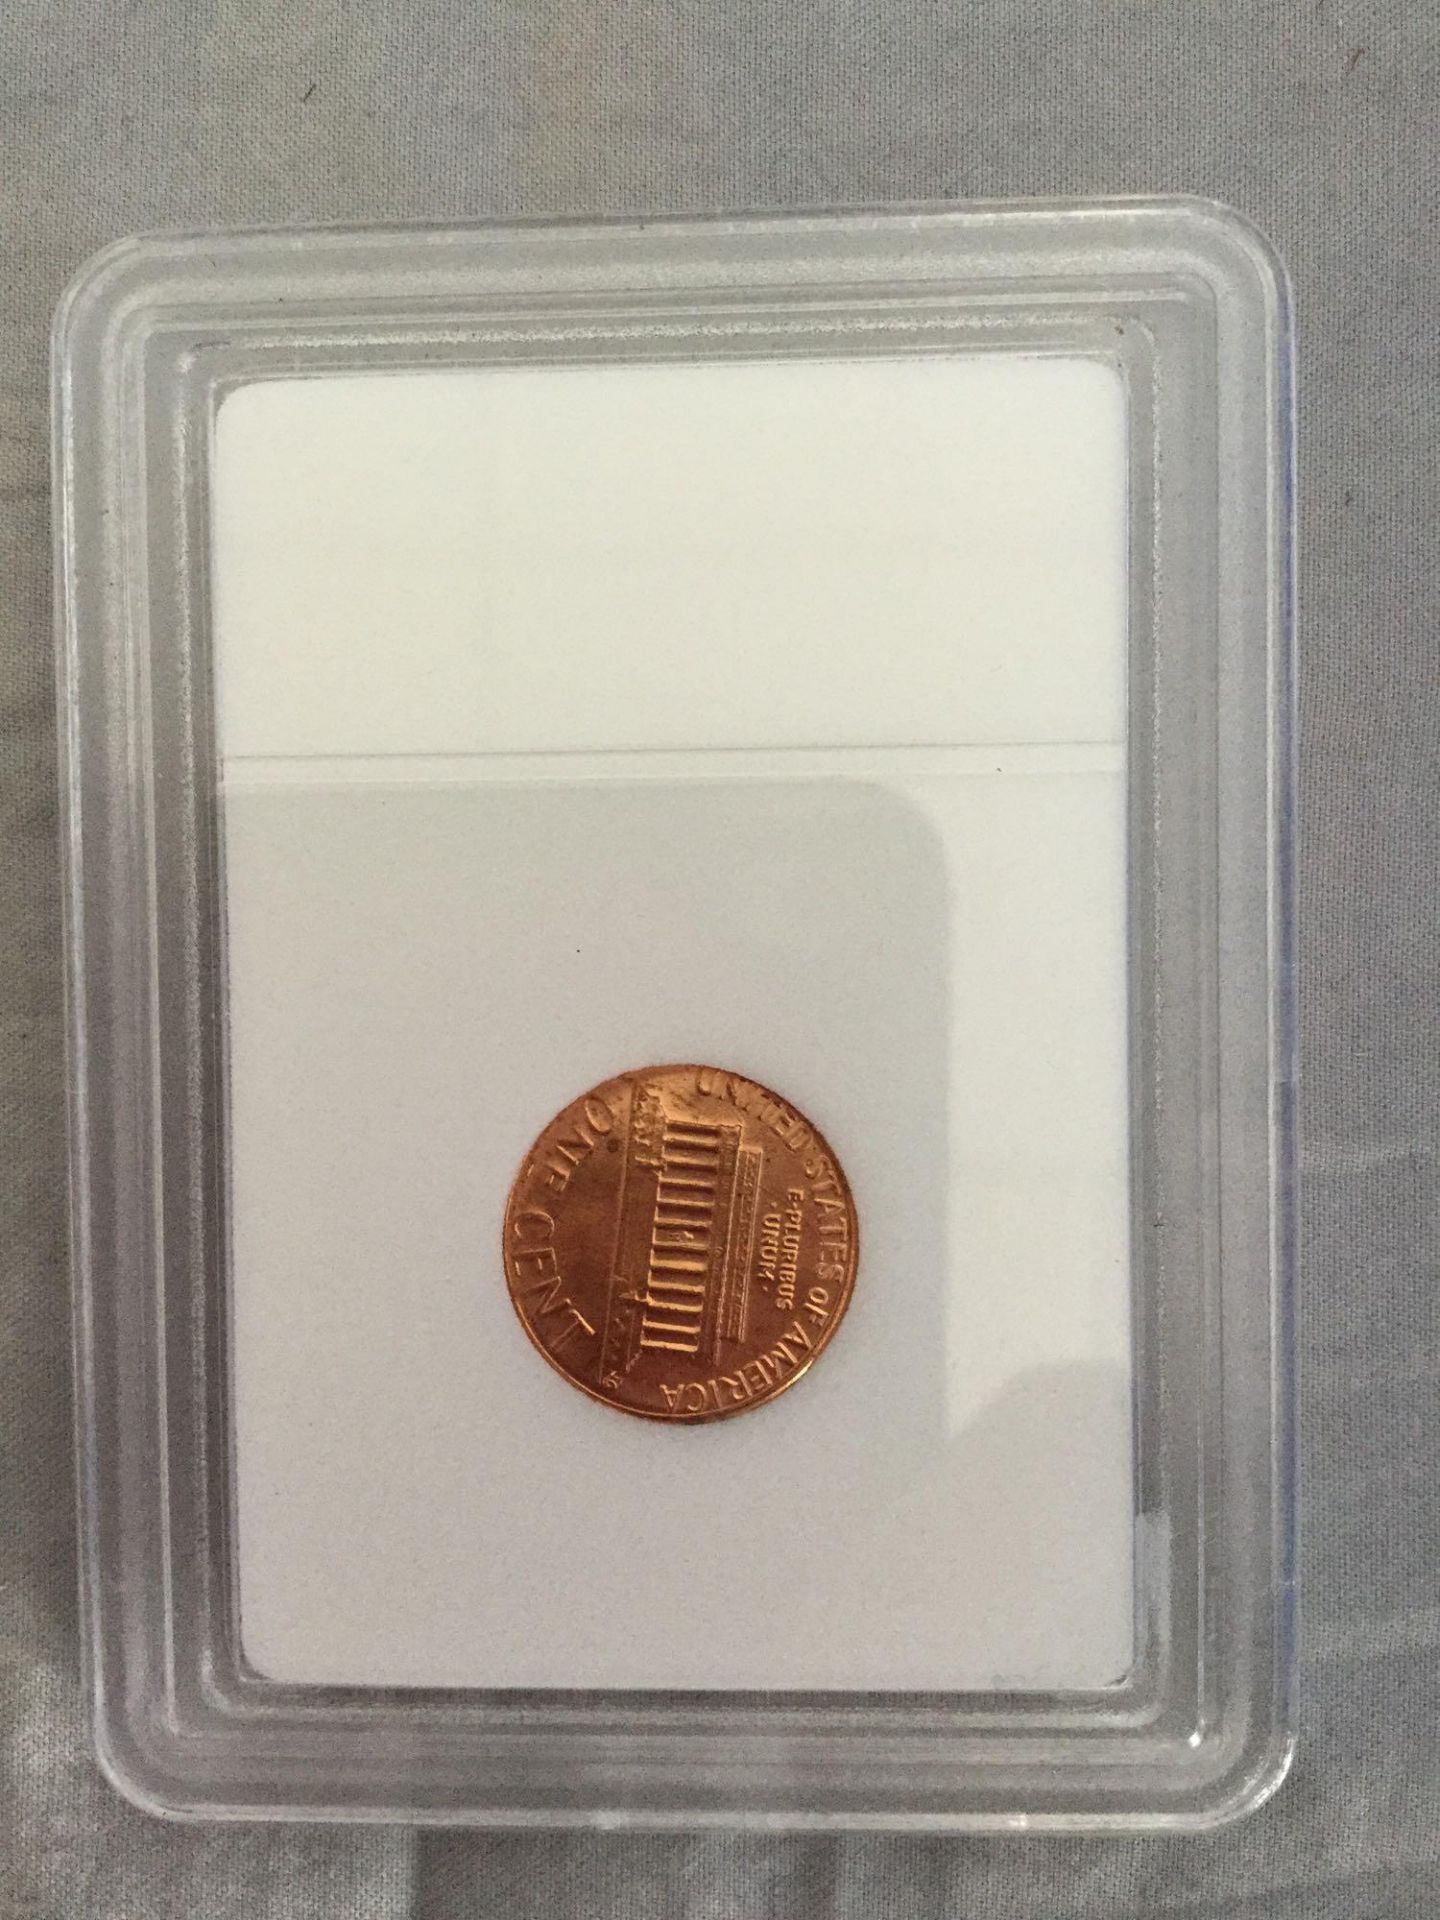 1985-P - US Lincoln one Cent Coin - Brilliant Uncirculated - Image 2 of 2